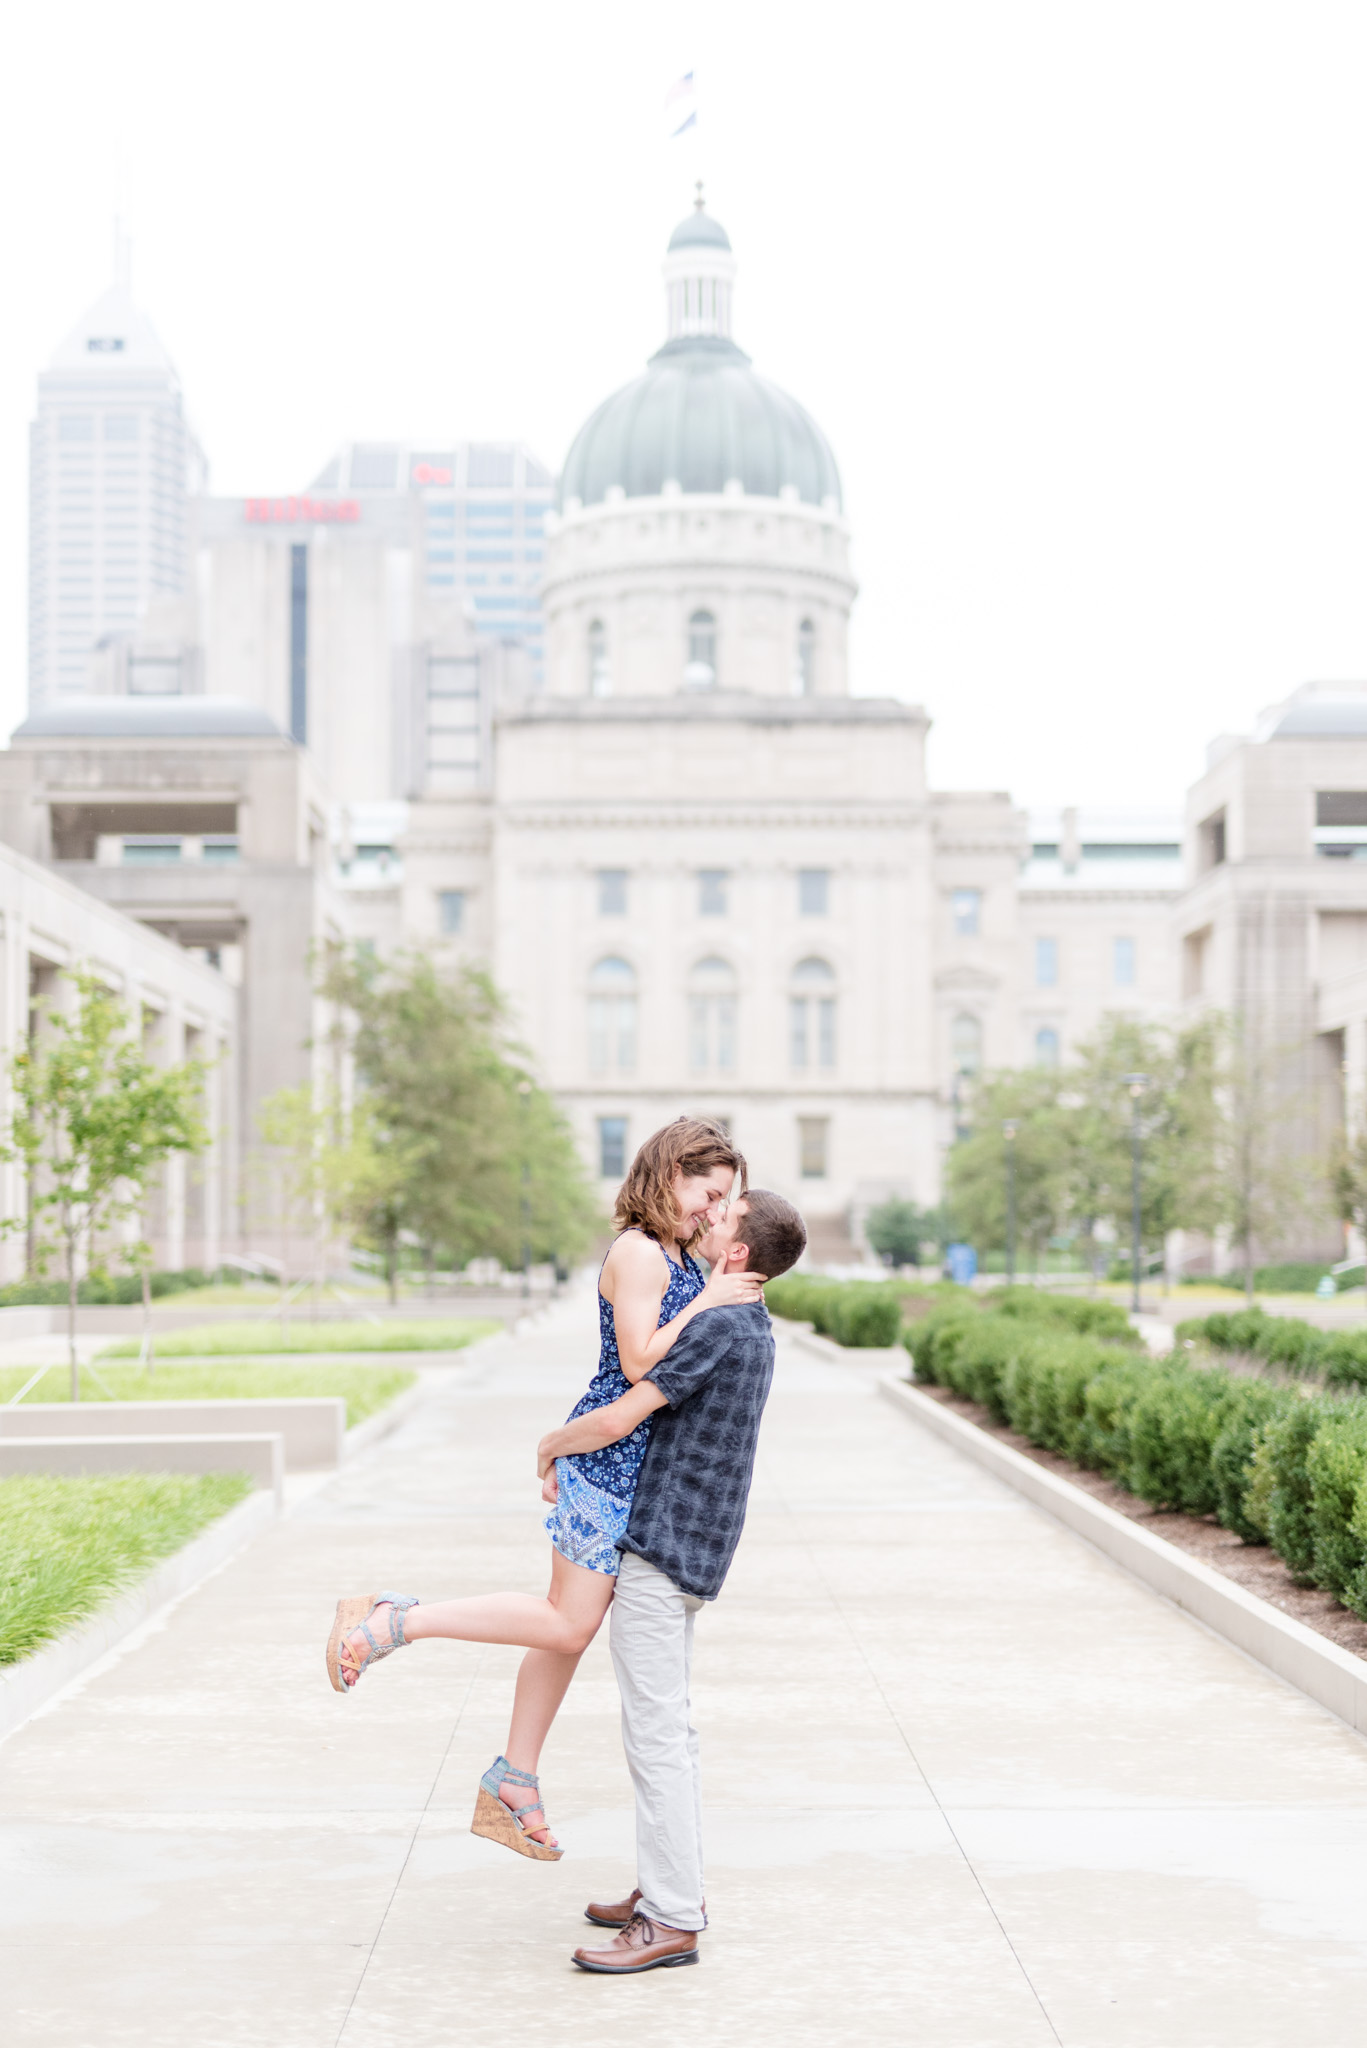 Guy lifts girl in front of Indiana Capital Building.